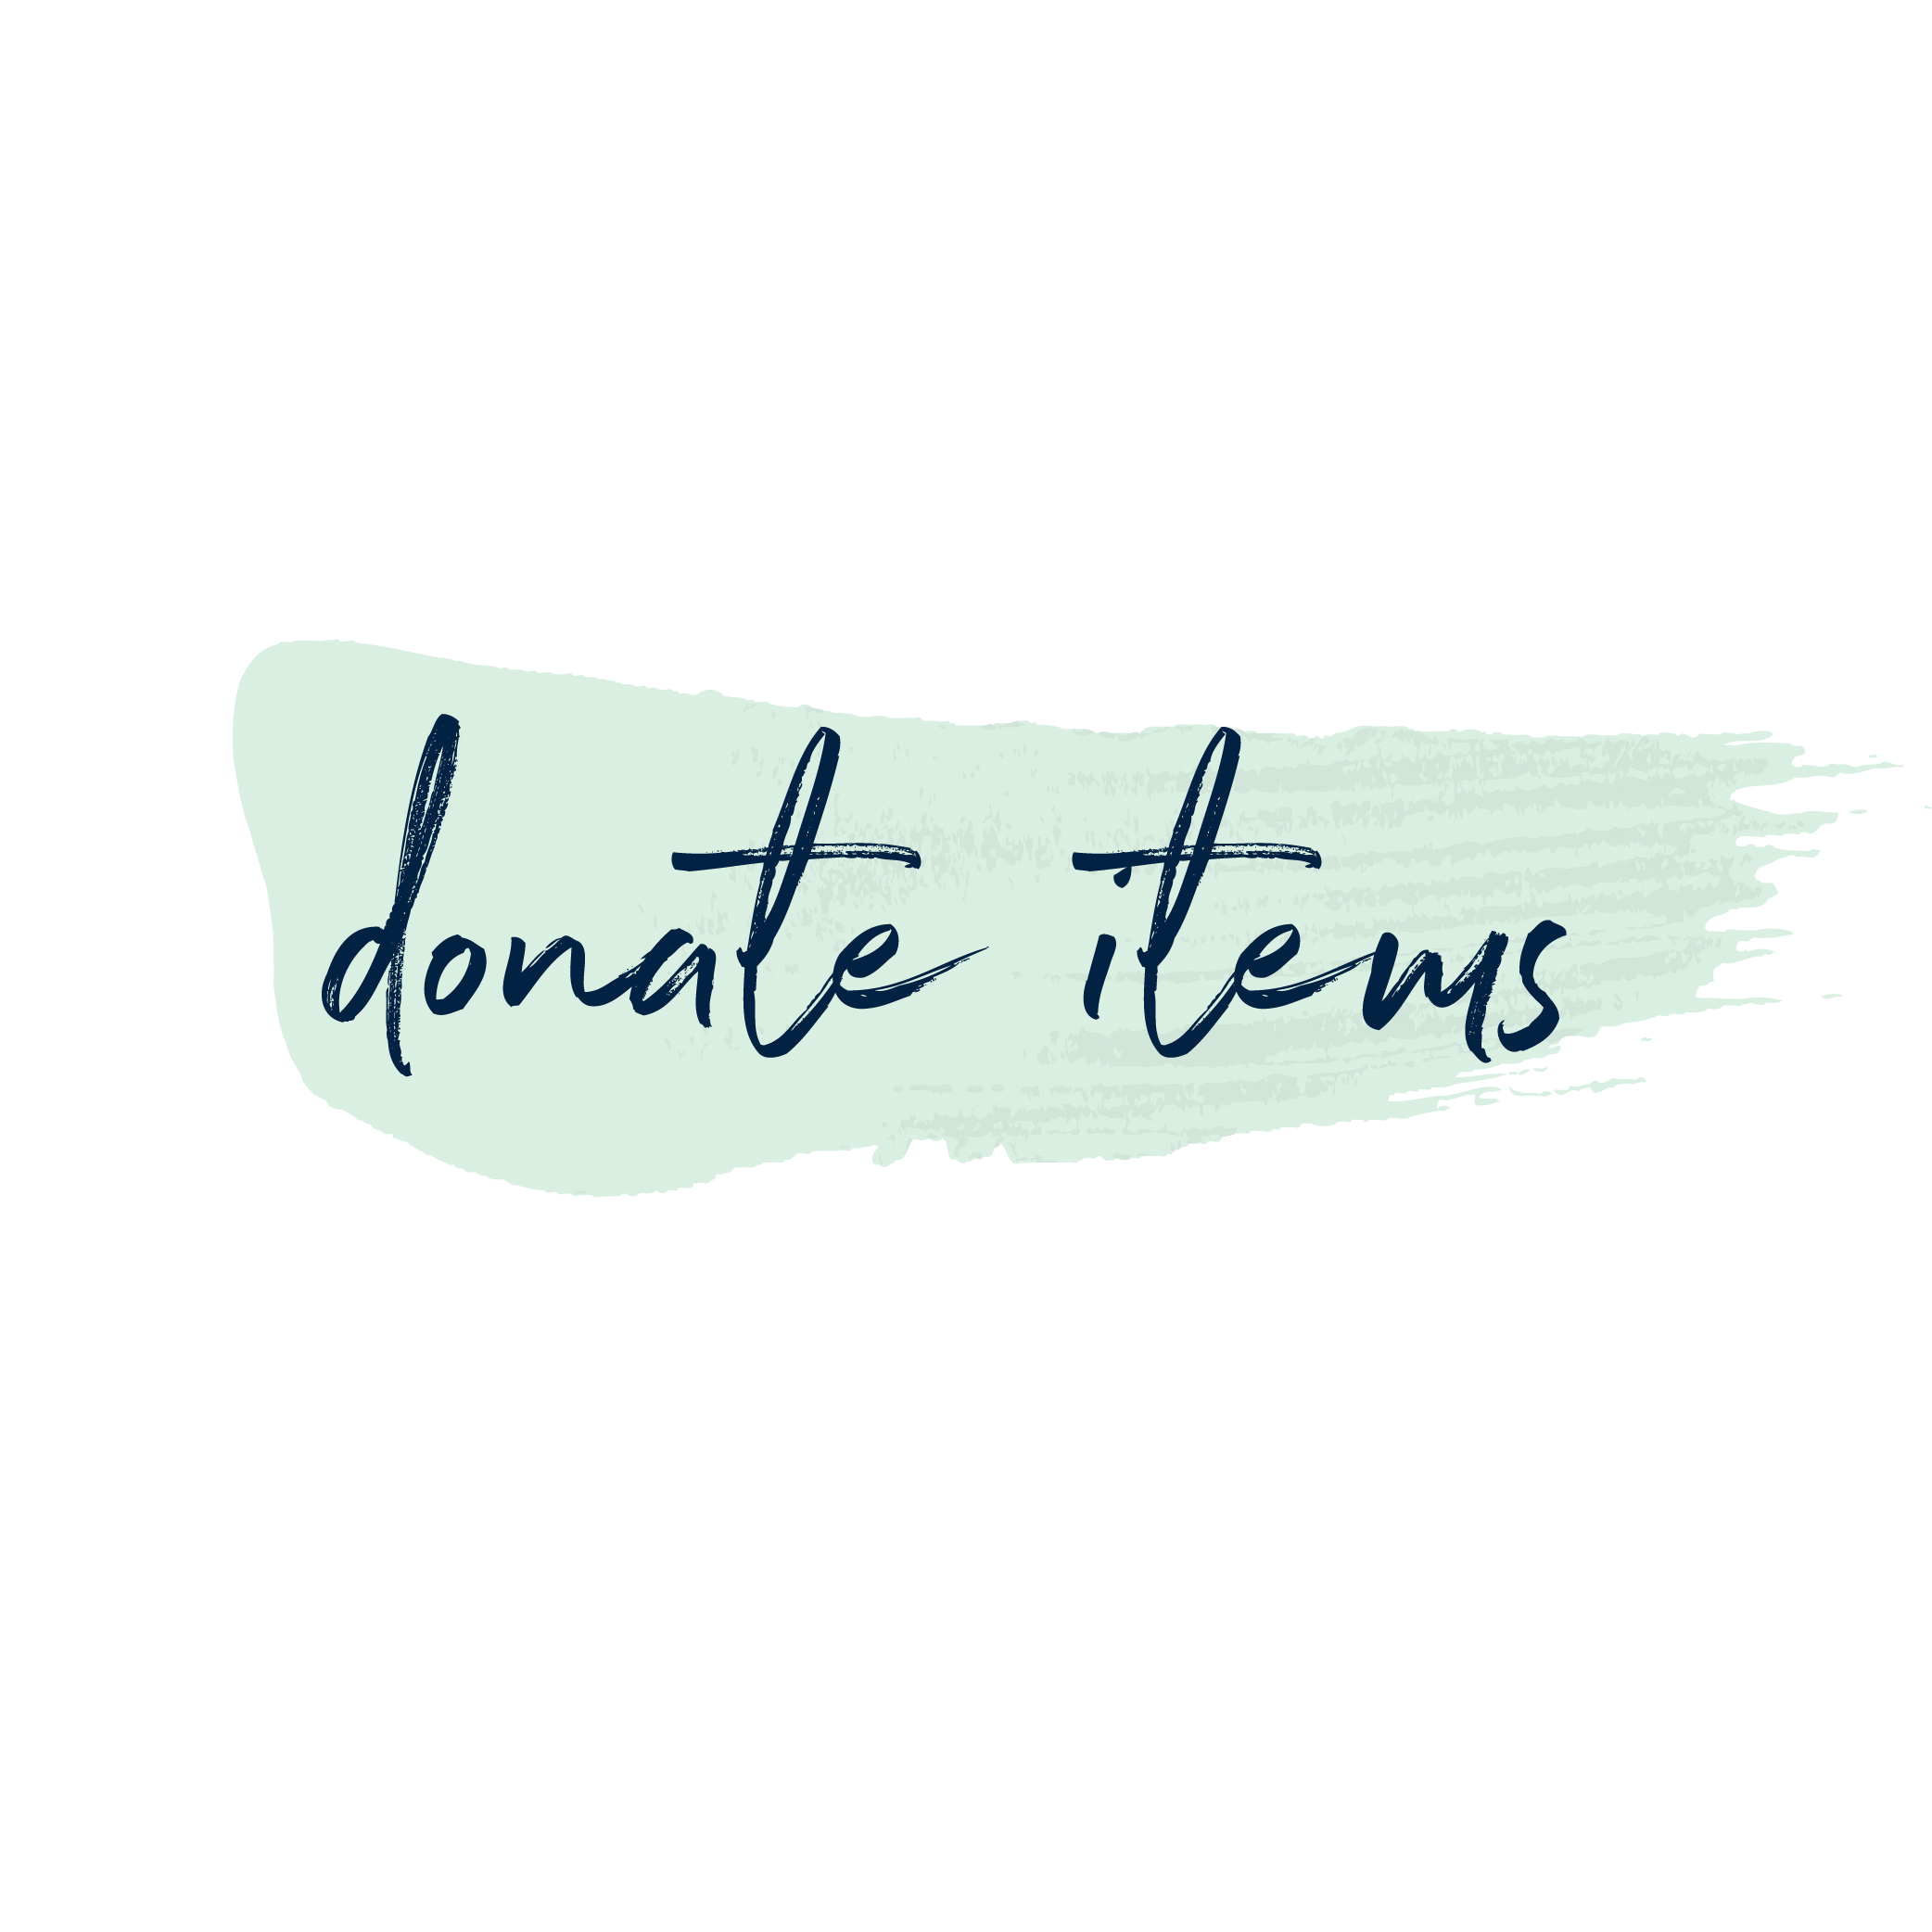 Copy of Copy of donate items